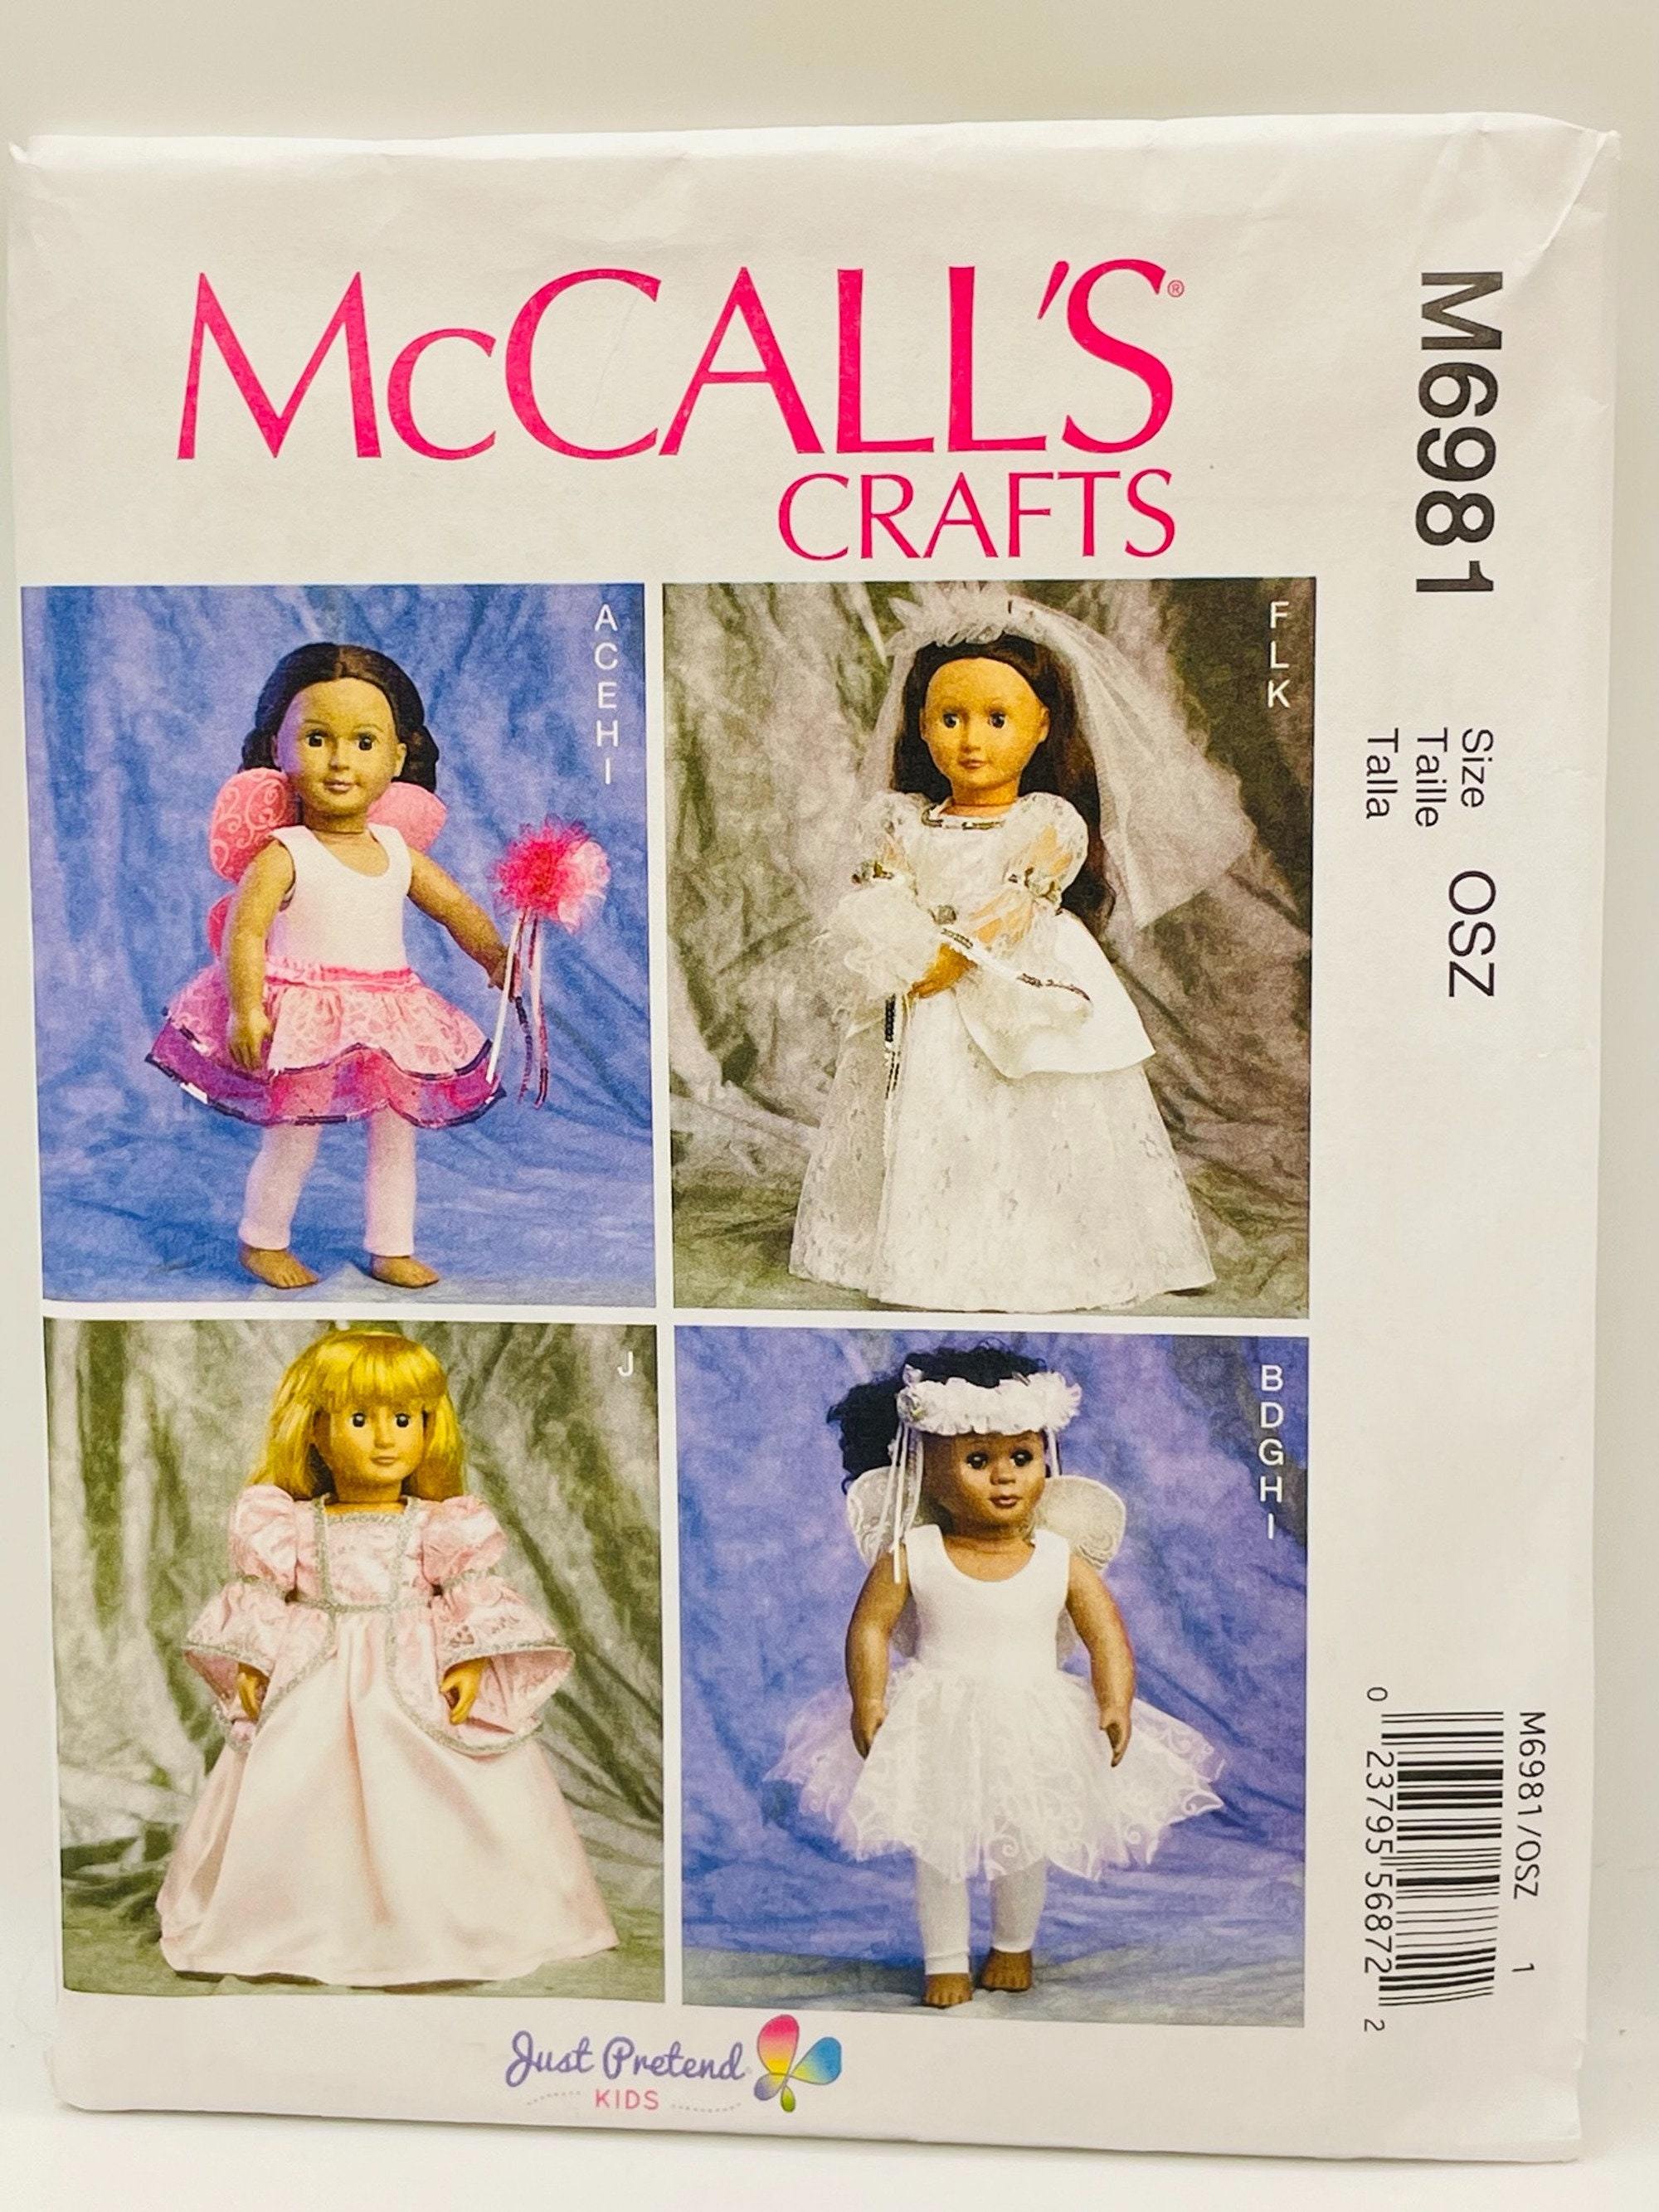 9 Skipper Doll Clothes Pattern Mccalls 7480 Vintage Pattern PDF Digital  Download Printed on 8-1/2x11 A4 Paper -  Canada